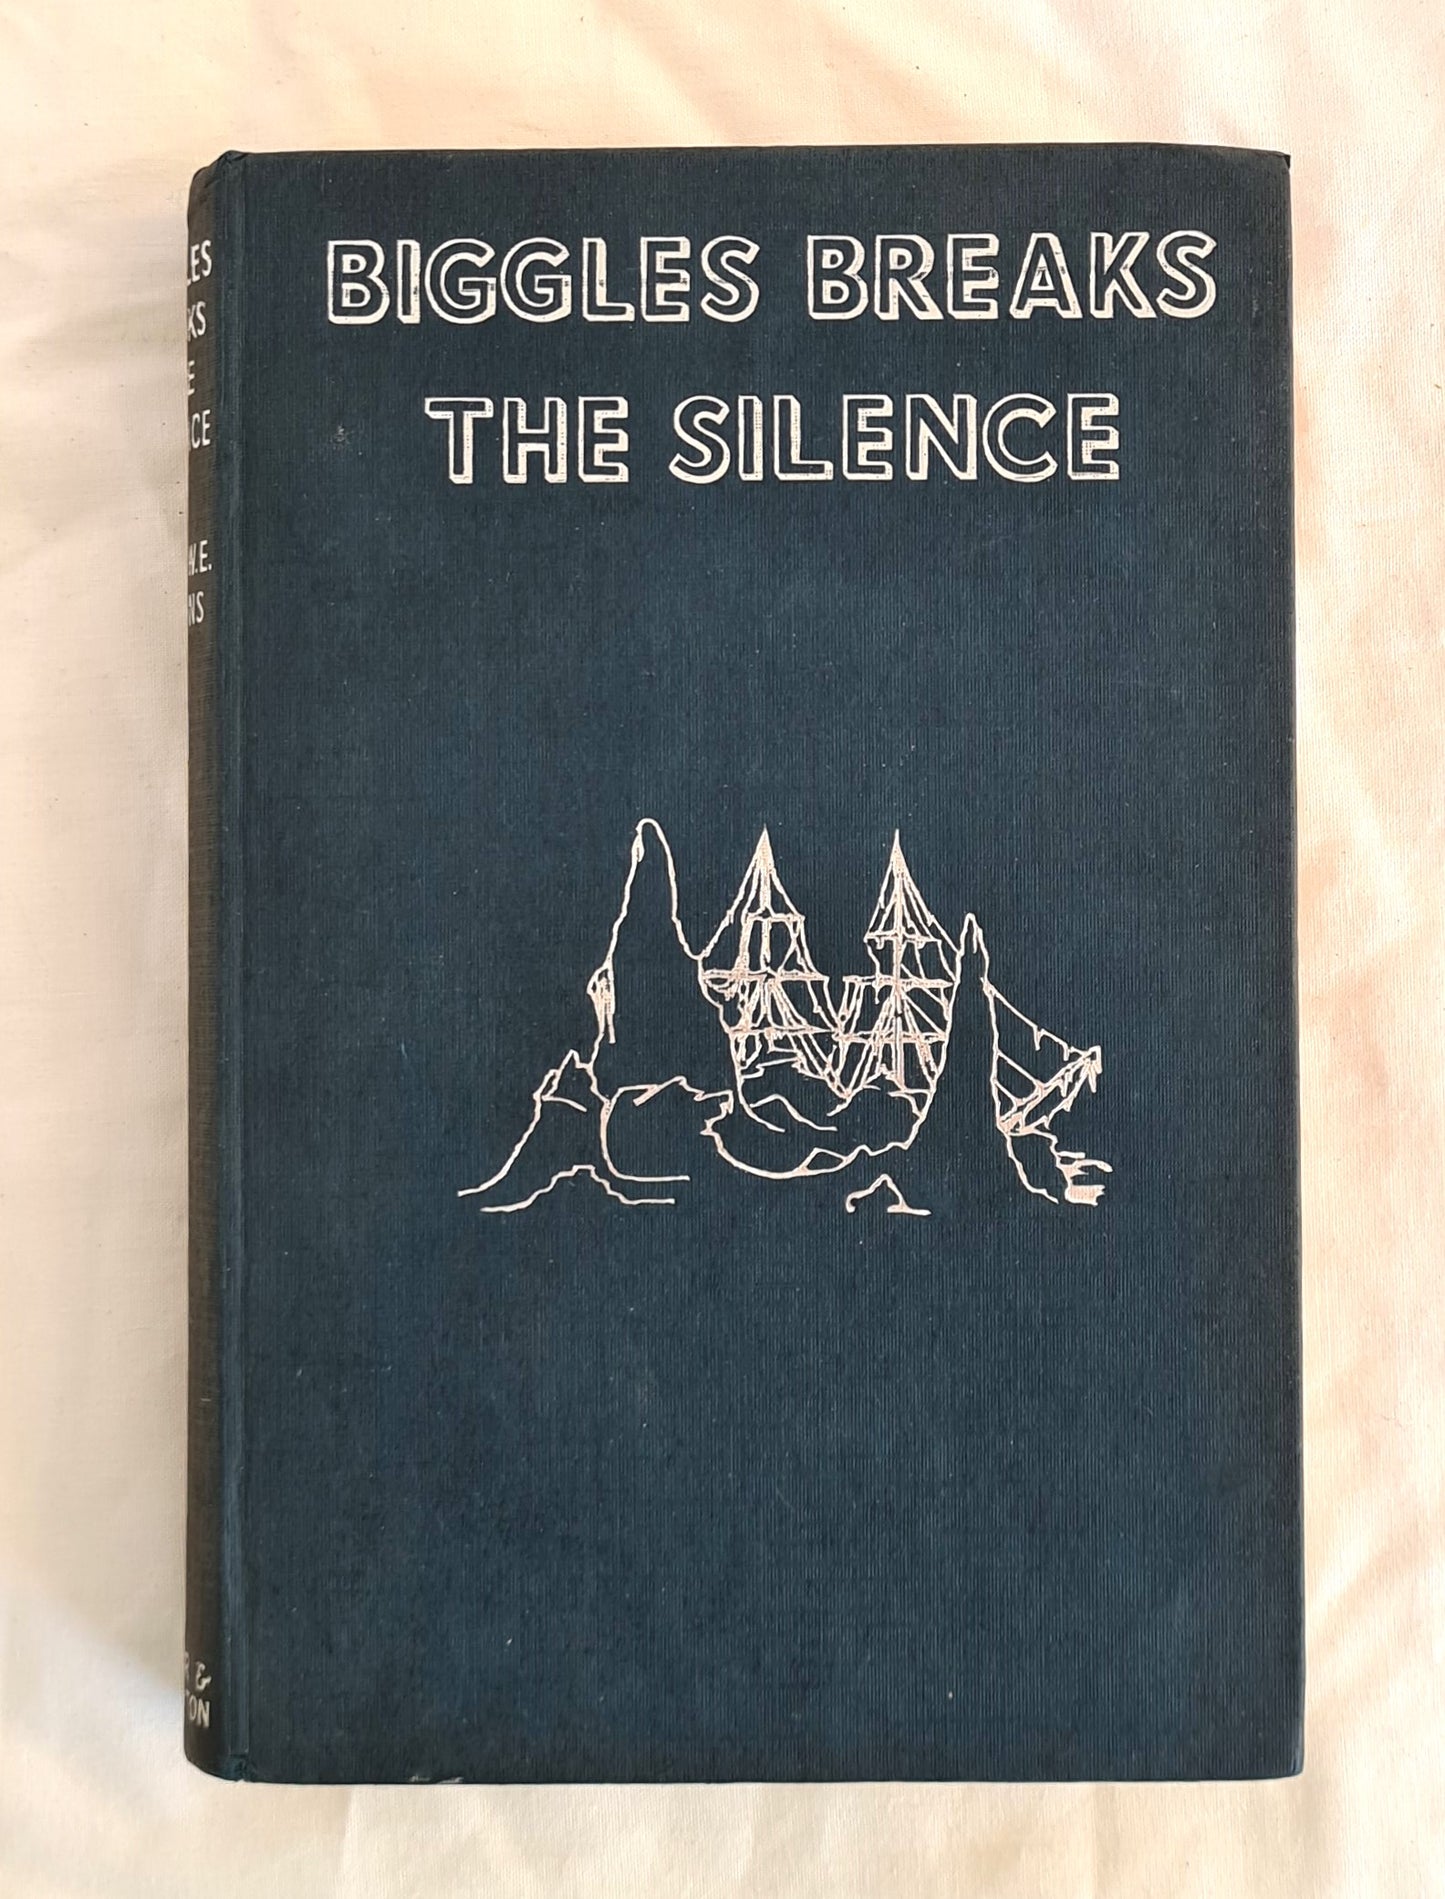 Biggles Breaks the Silence  An Adventure of Sergeant Bigglesworth, of the Special Air Police, and his comrades of the Service  by Captain W. E. Johns  illustrated by Stead